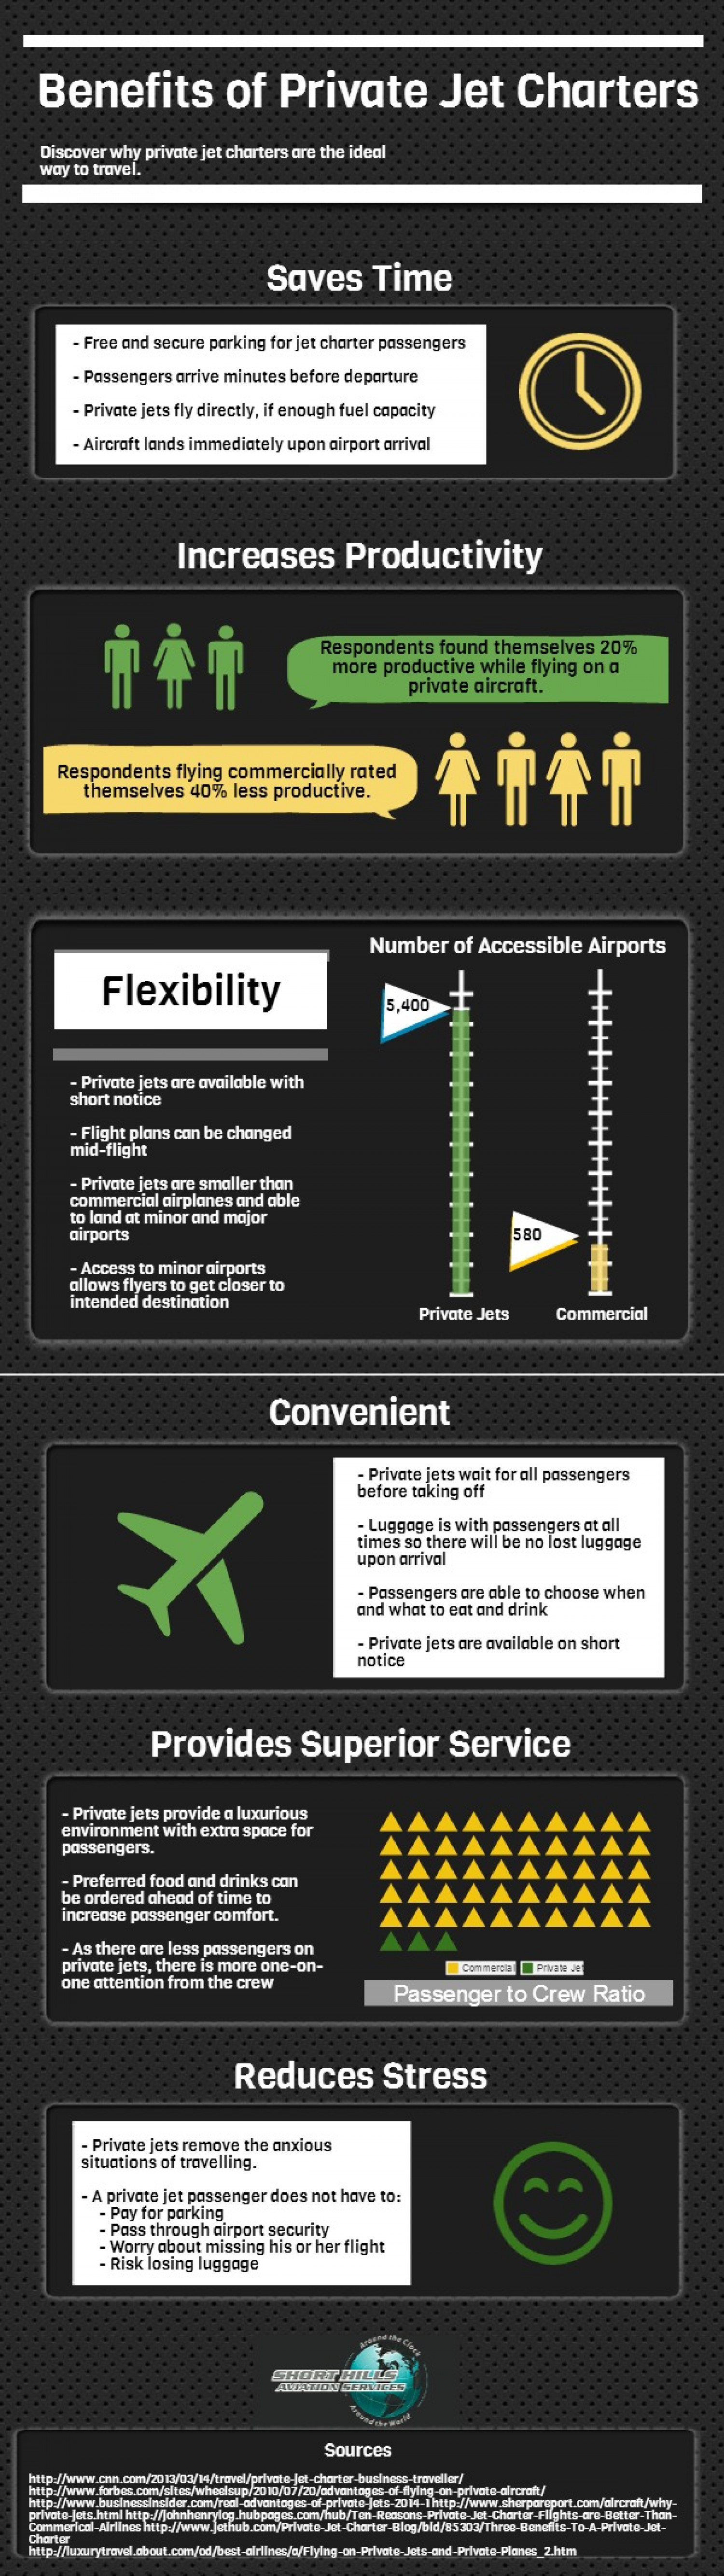 Benefits of Private Jet Charters Infographic